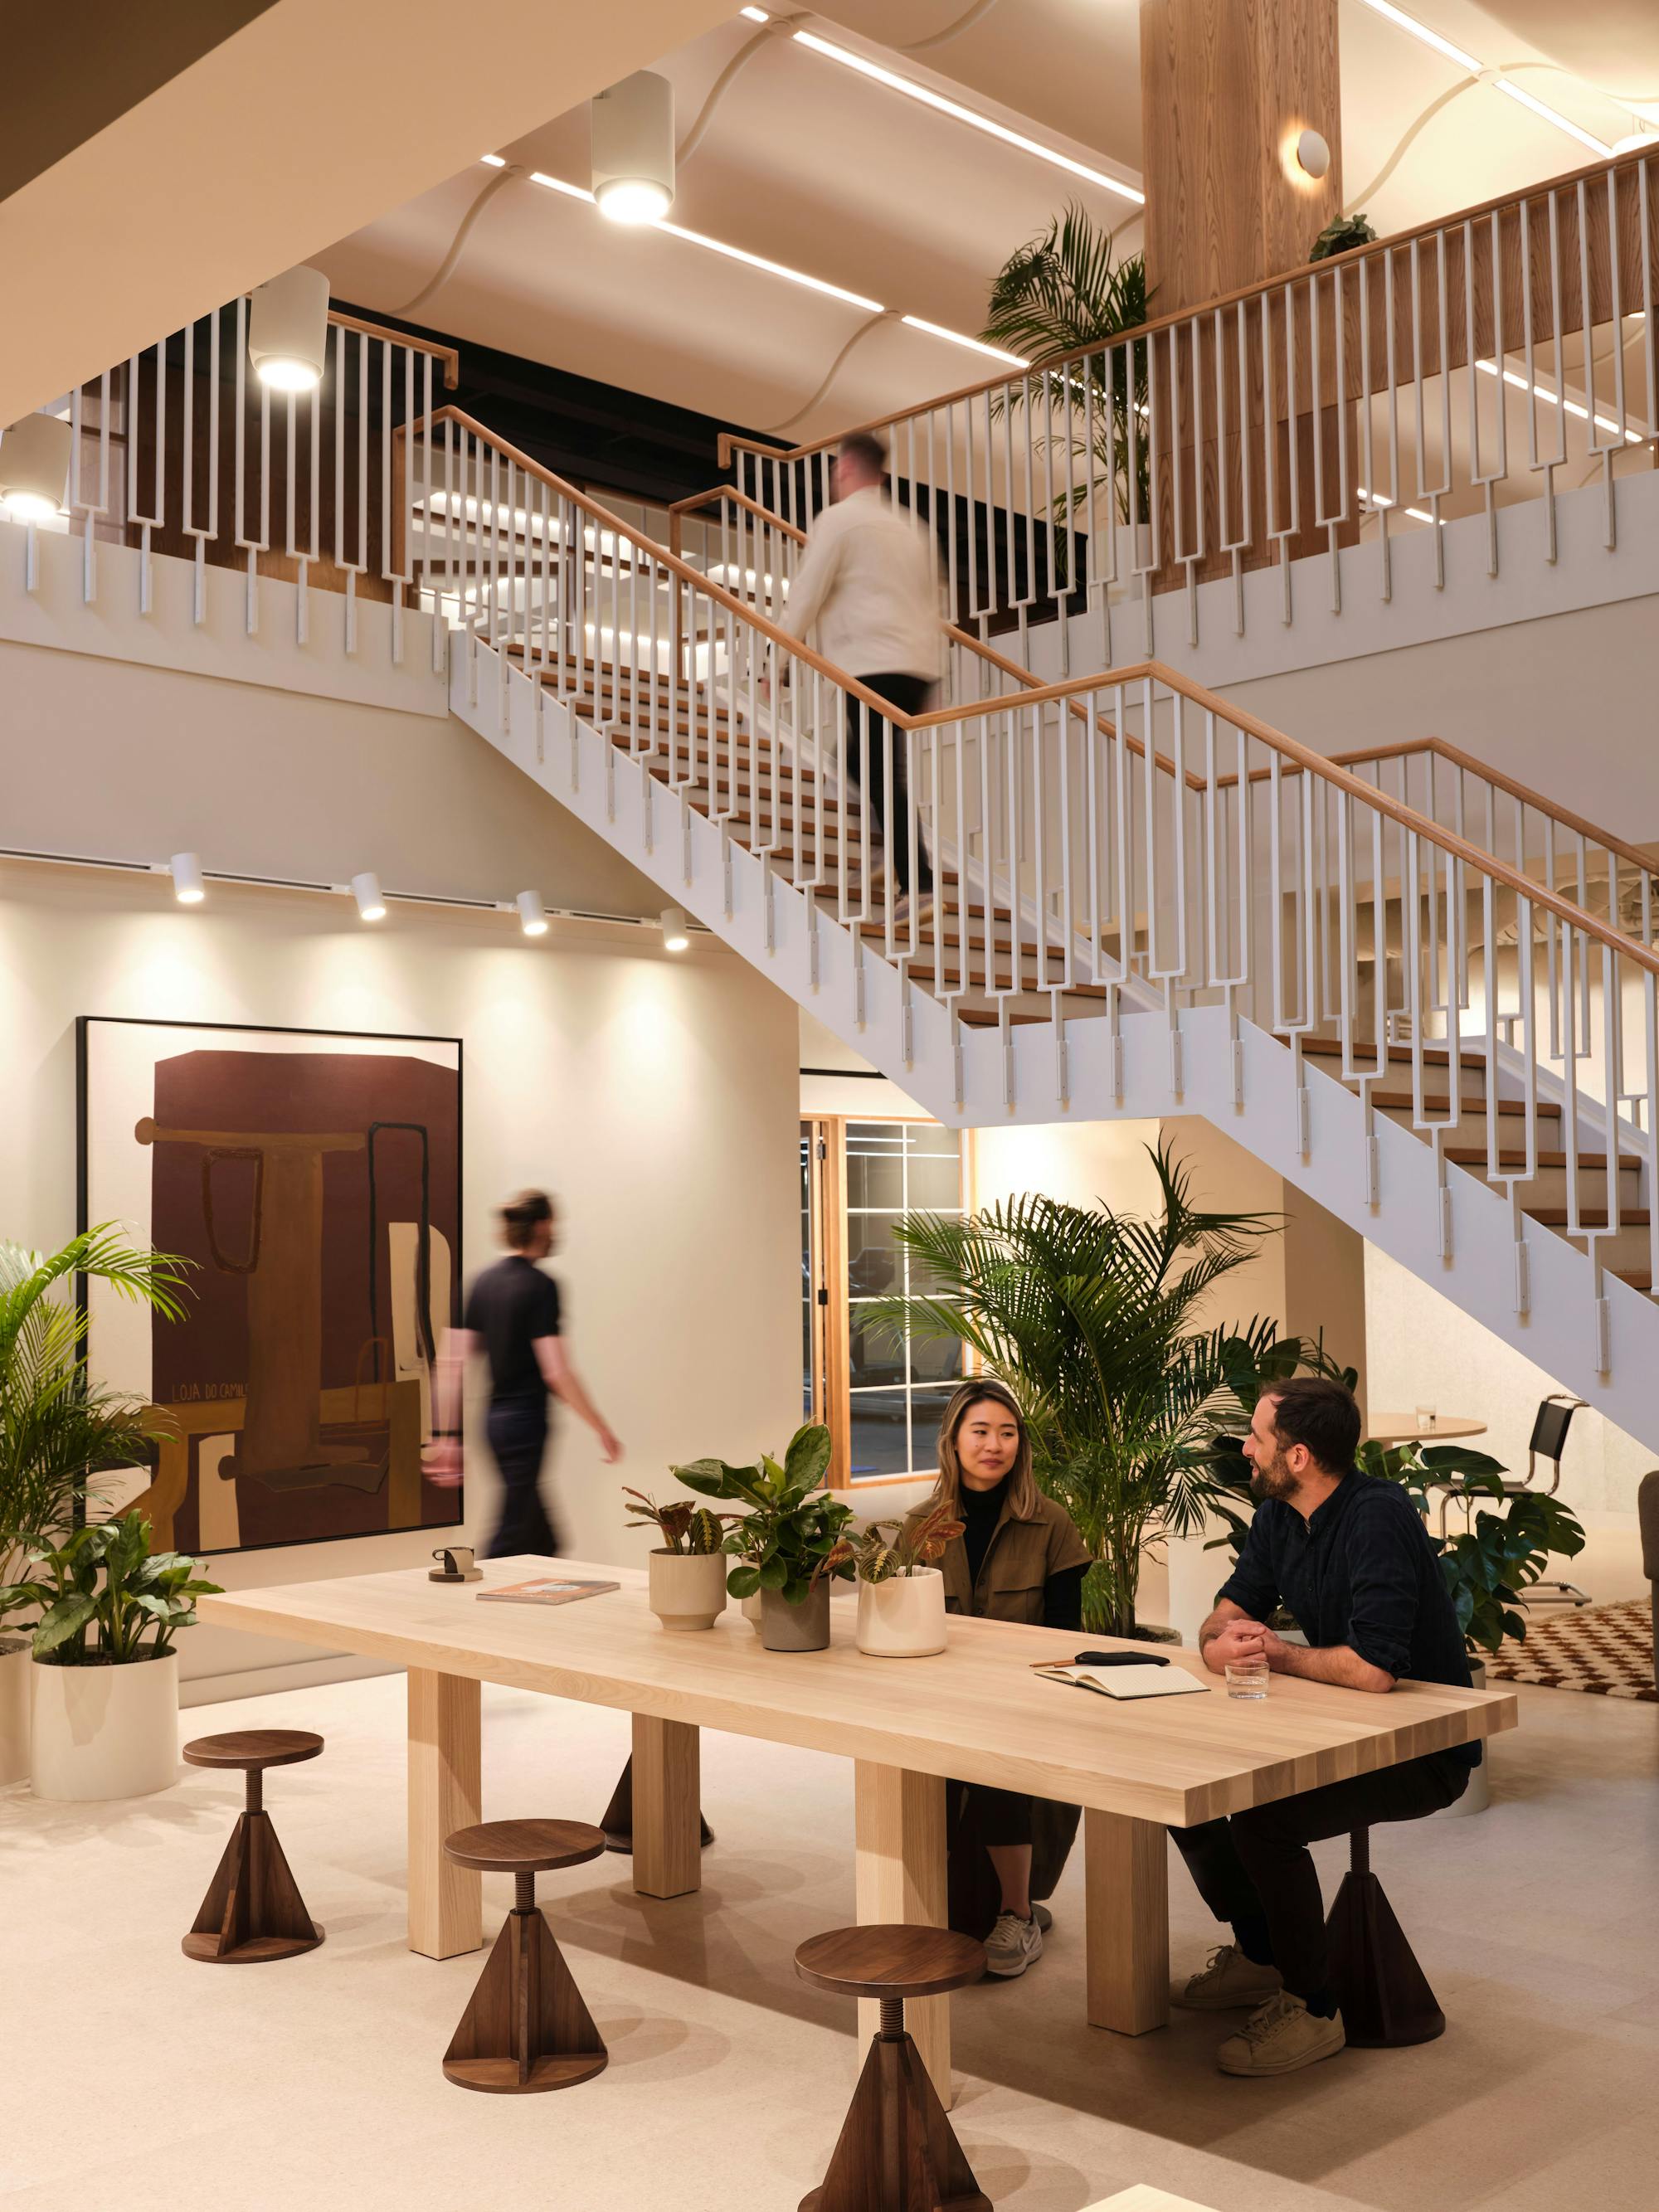 A membership with Fora unlocks exclusive access to our collection of over 60 distinctive workspaces across London, the UK and Germany. So, you’ll always find the space you need to do your best work in your own unique way.  